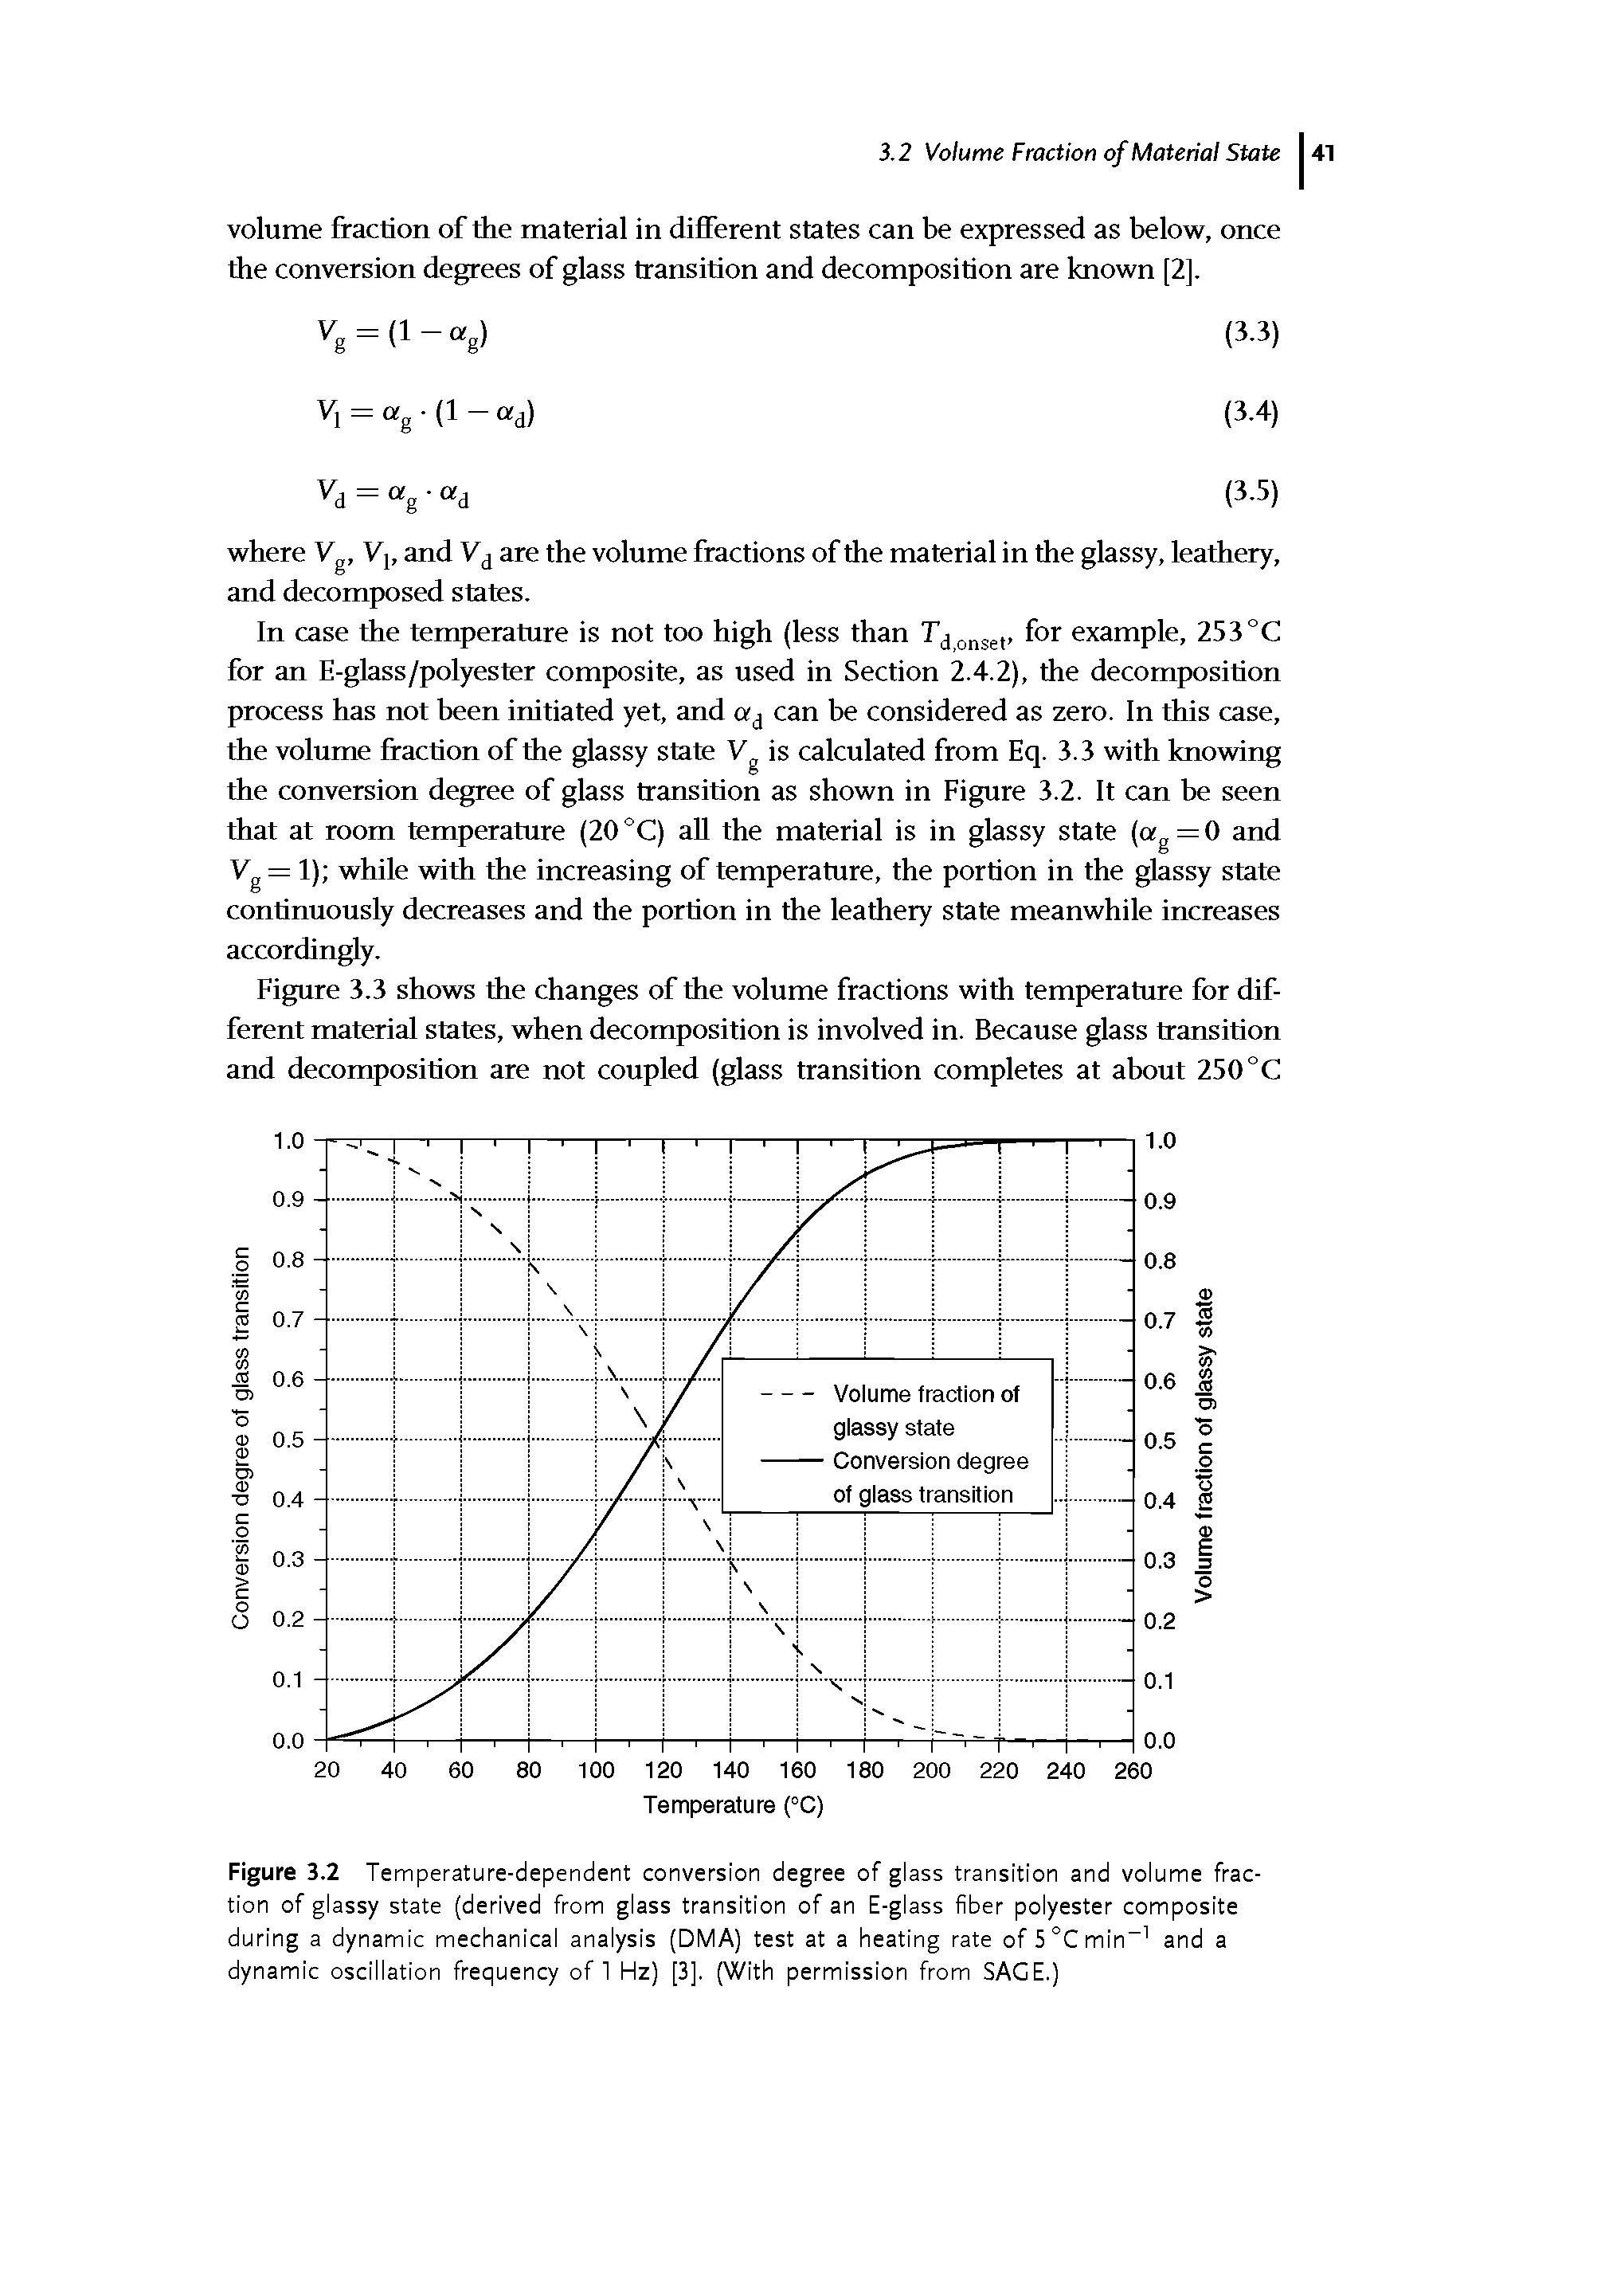 Figure 3.2 Temperature-dependent conversion degree of glass transition and volume fraction of glassy state (derived from glass transition of an E-glass fiber polyester composite during a dynamic mechanical analysis (DMA) test at a heating rate of5°Cmin and a dynamic oscillation frequency of 1 Hz) [3]. (With permission from SAGE.)...